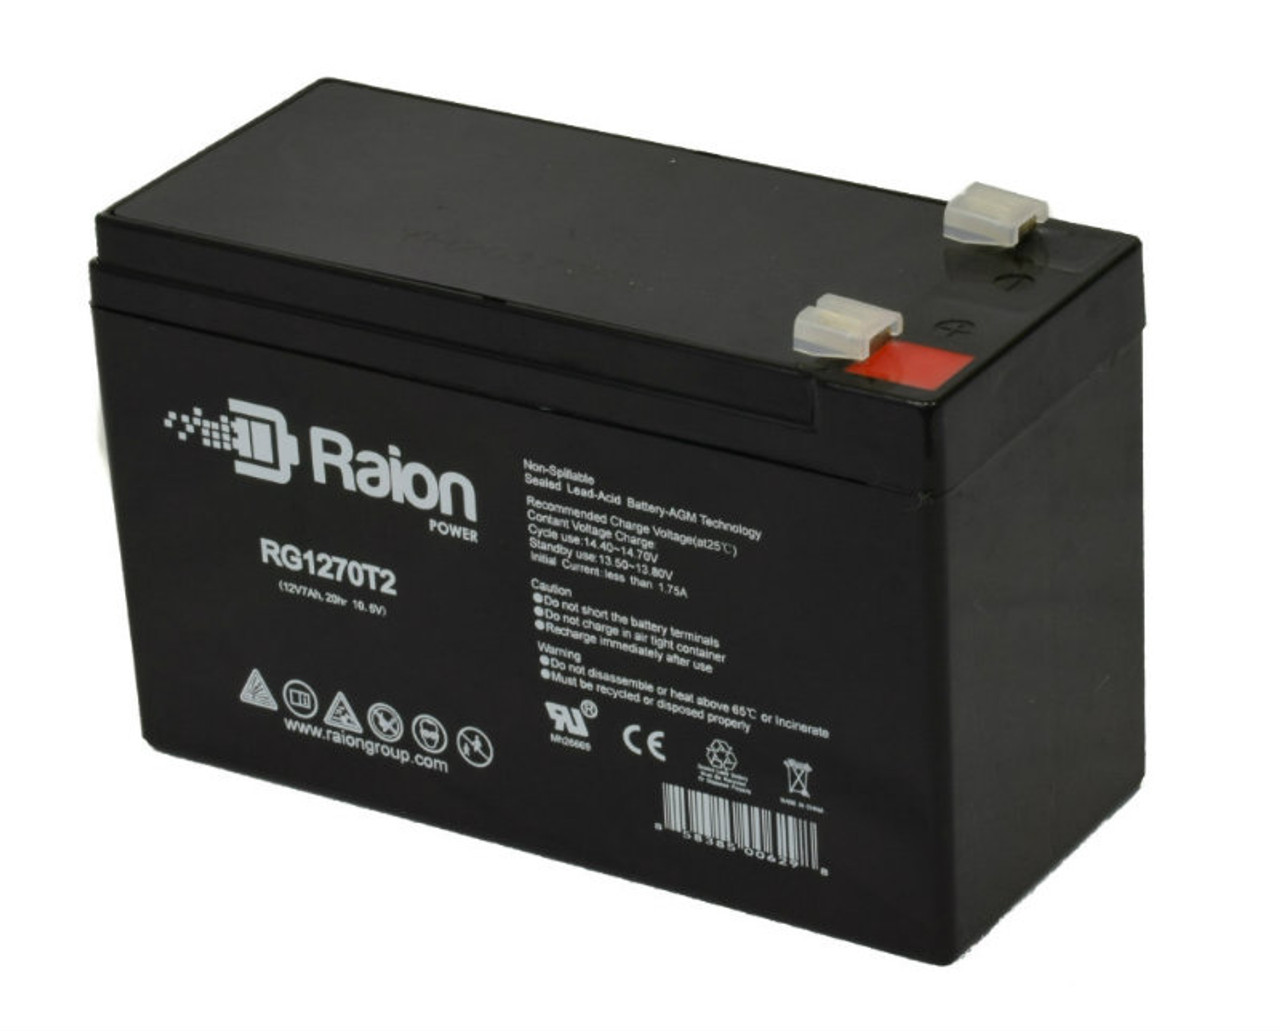 Raion Power Replacement 12V 7Ah RG1270T1 Fire Alarm Battery for Altronix AL125UL